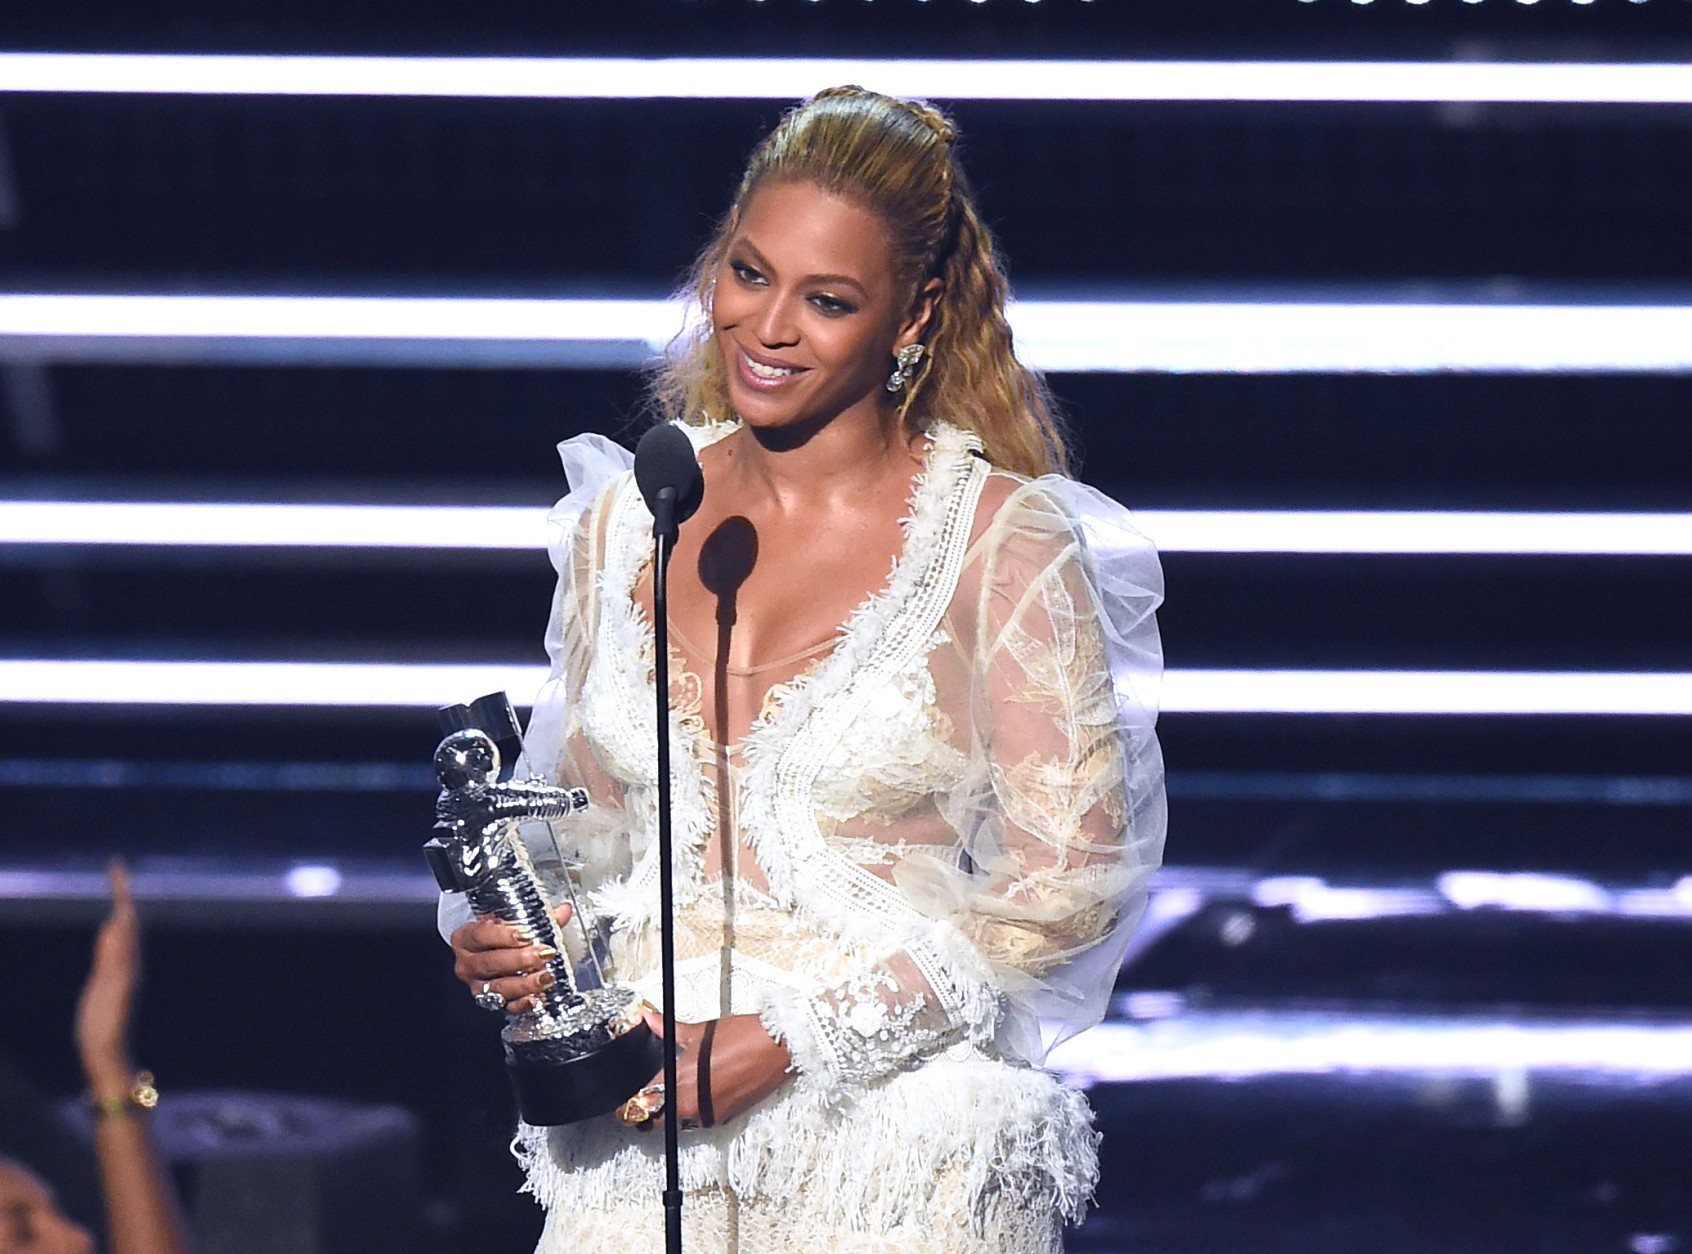 Beyonce accepts the award for Video of the Year for Lemonade at the MTV Video Music Awards at Madison Square Garden on Sunday, Aug. 28, 2016, in New York. (Photo by Charles Sykes/Invision/AP)